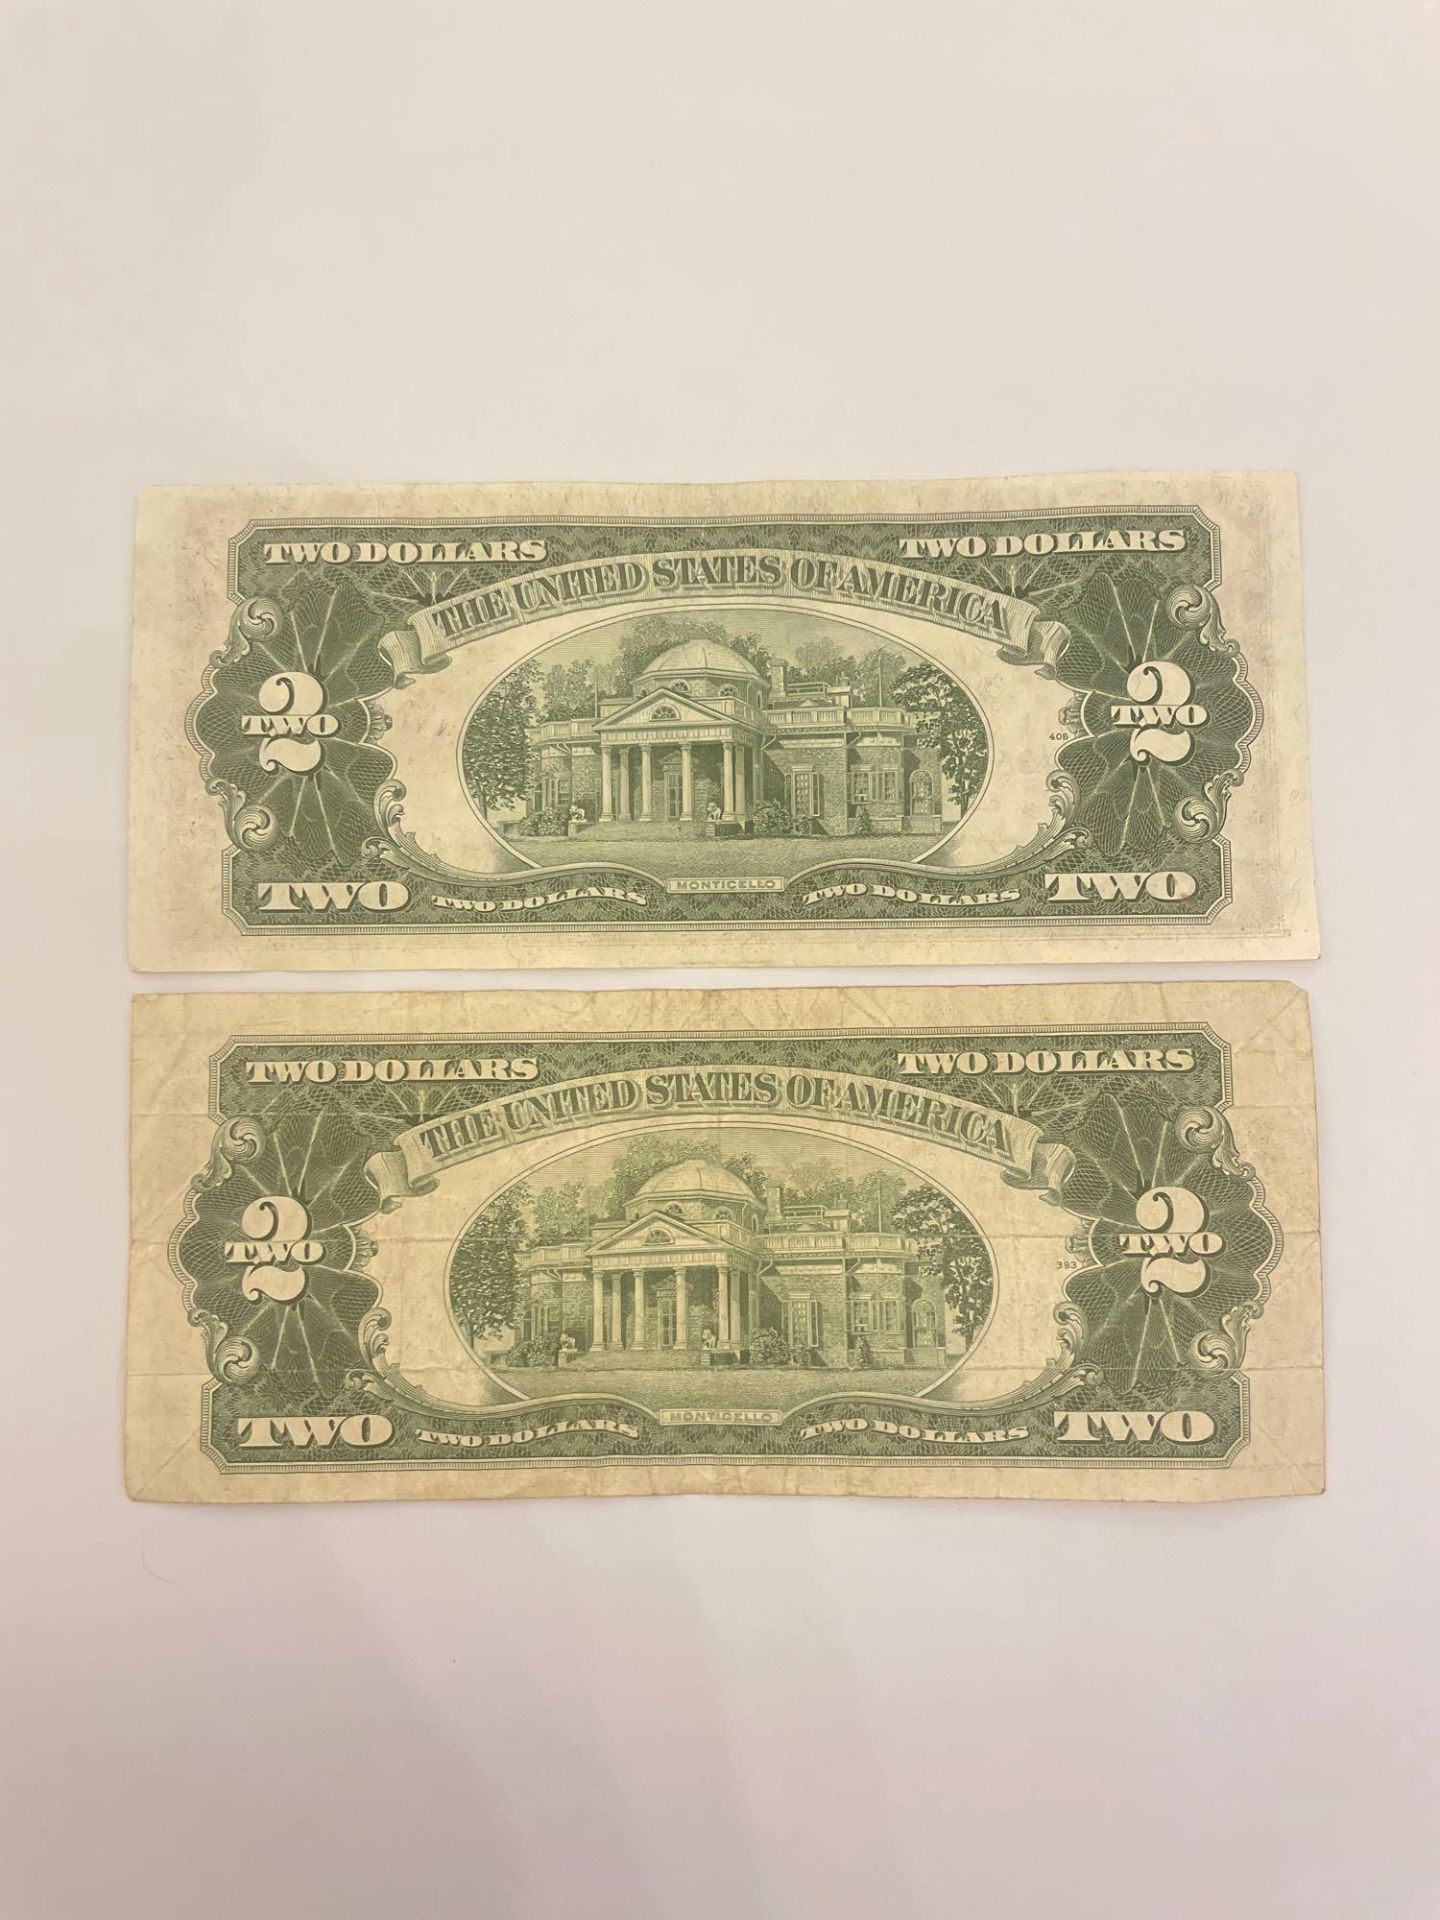 Two $2 Red seal Bills (1953) - Image 3 of 3